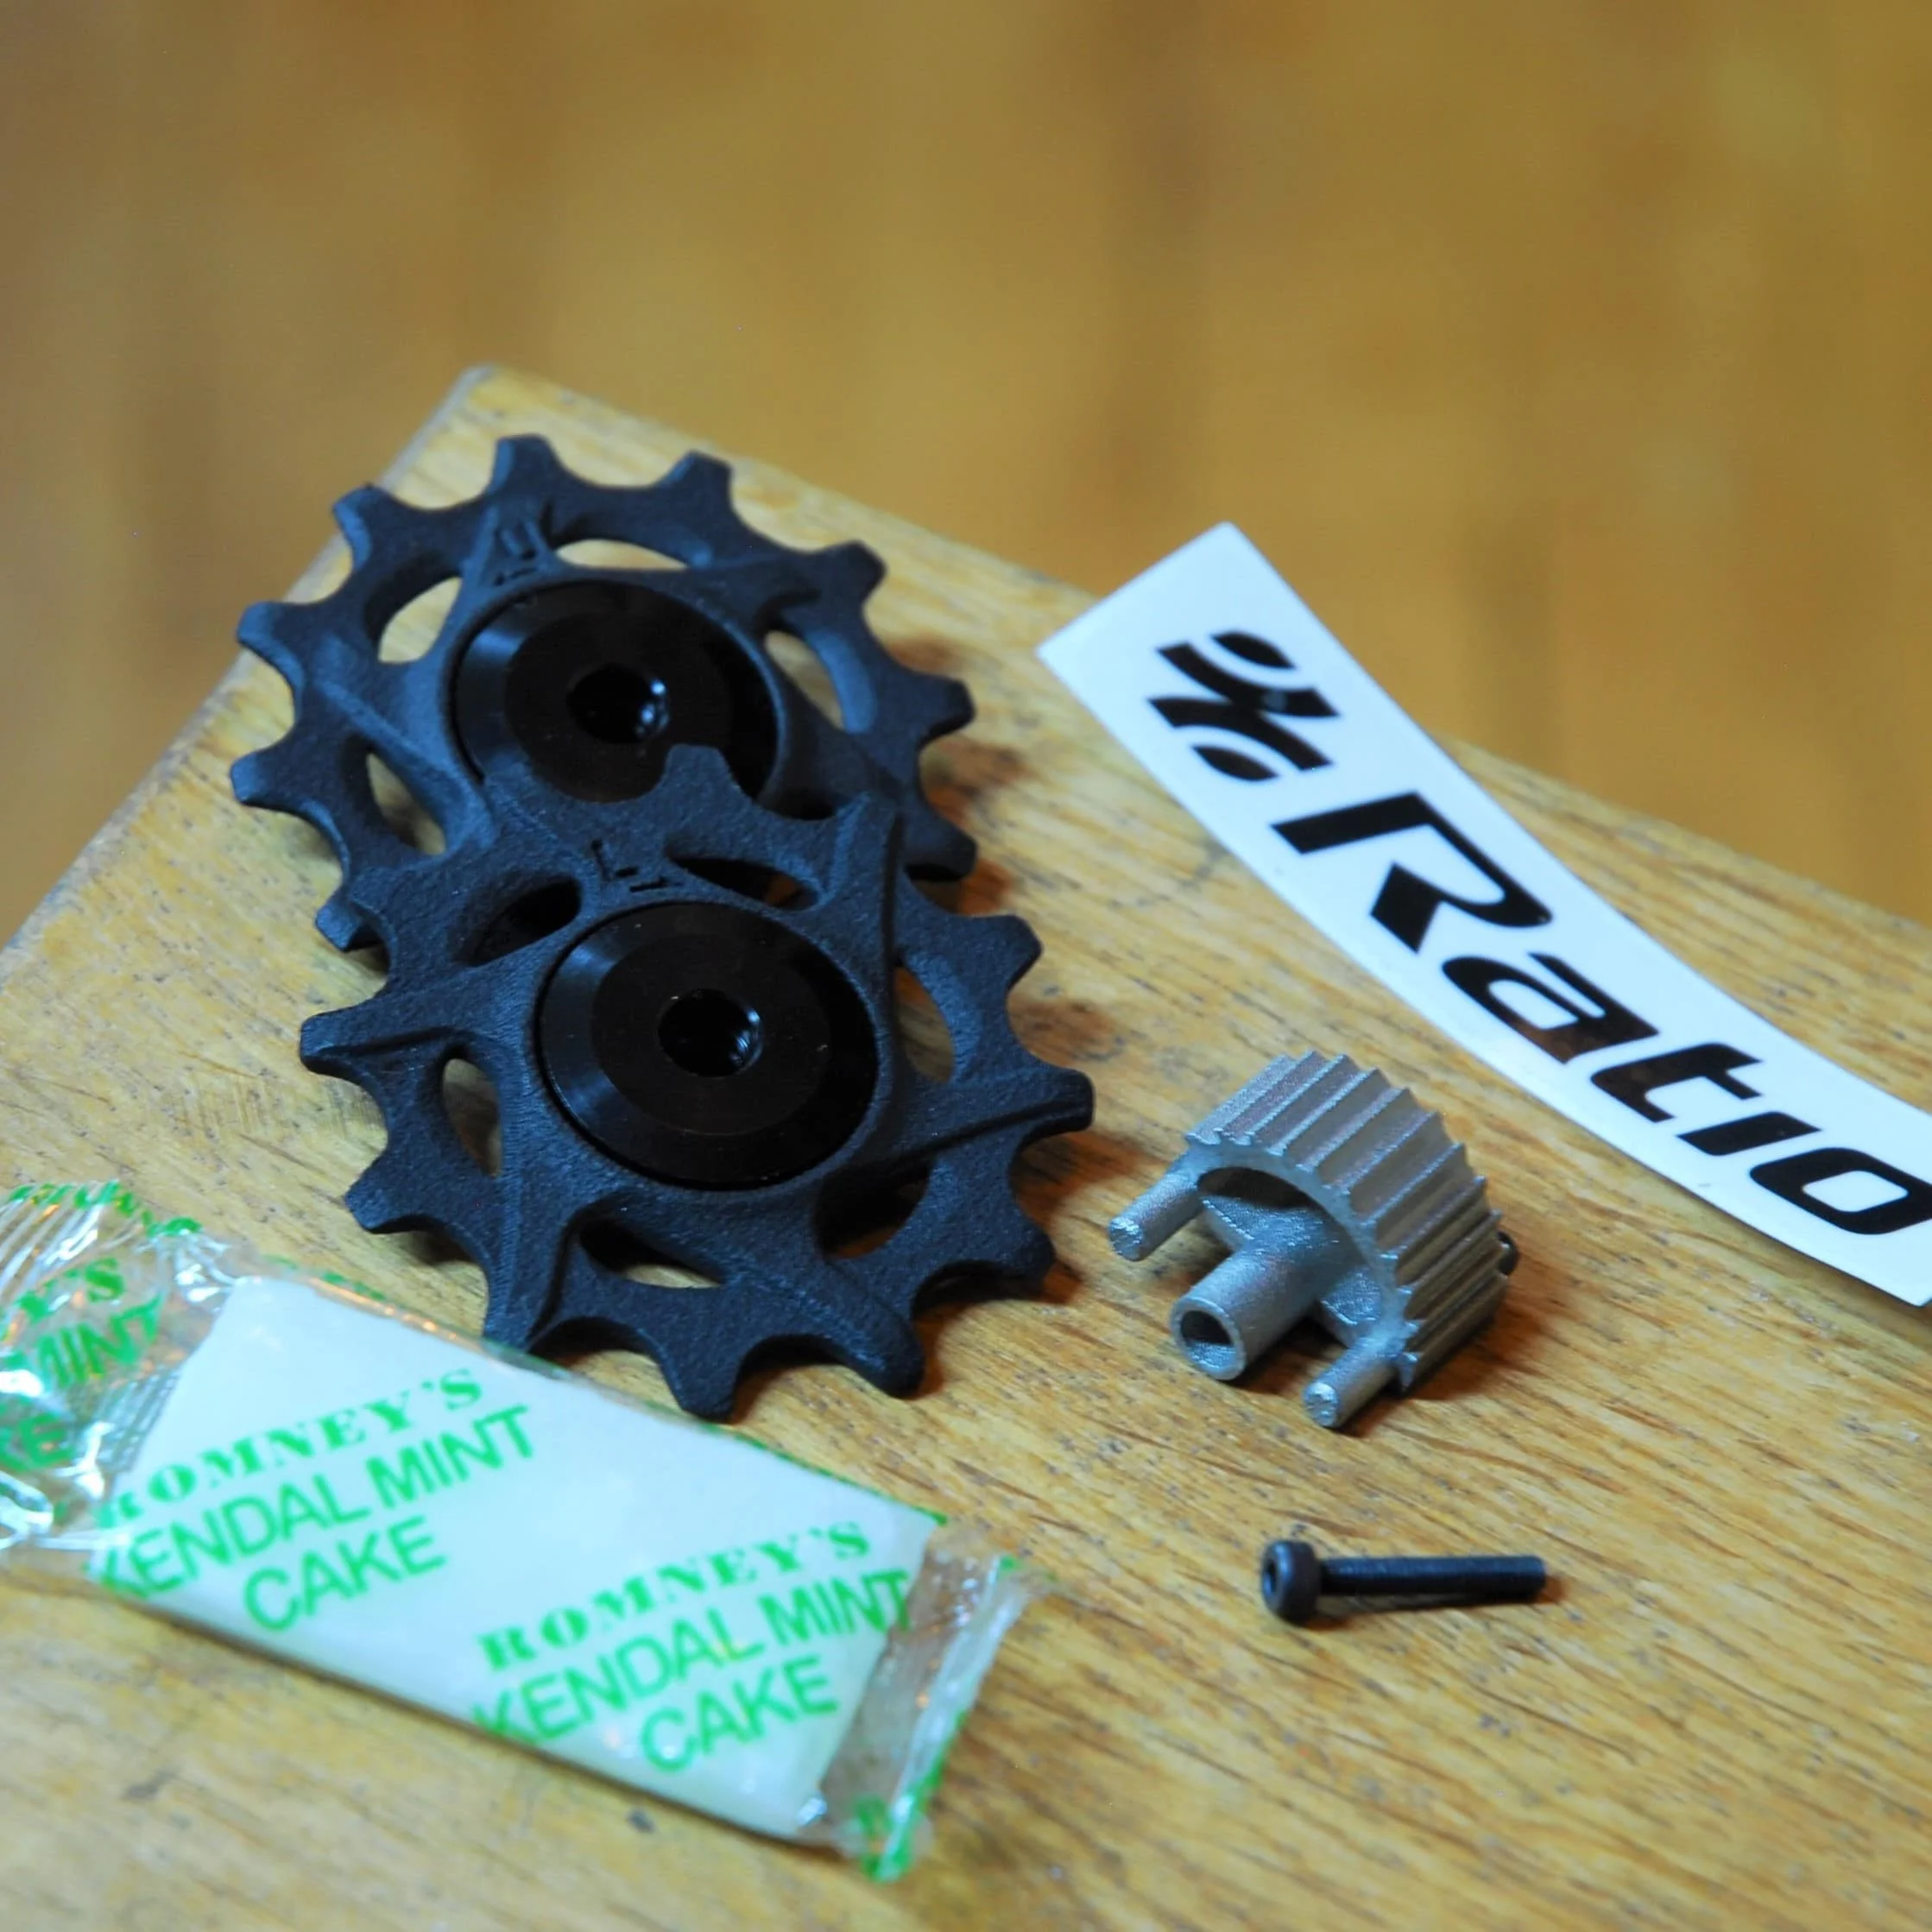 New Products: 1×12 for the road – Upgrade kit and cable spool